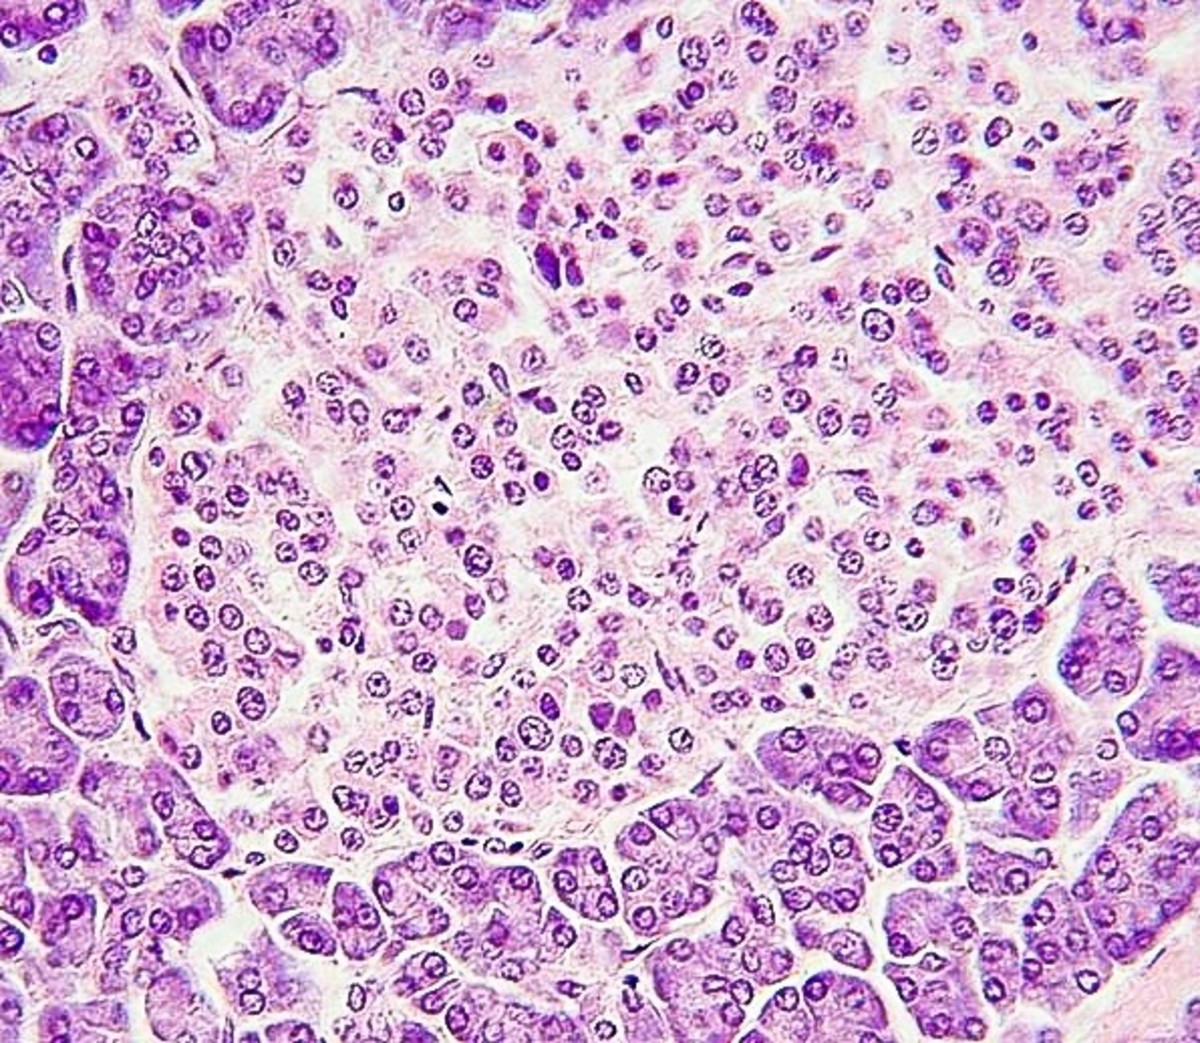 An islet of Langerhans or pancreatic islet (the paler area in this stained slide) makes both glucagon and insulin.